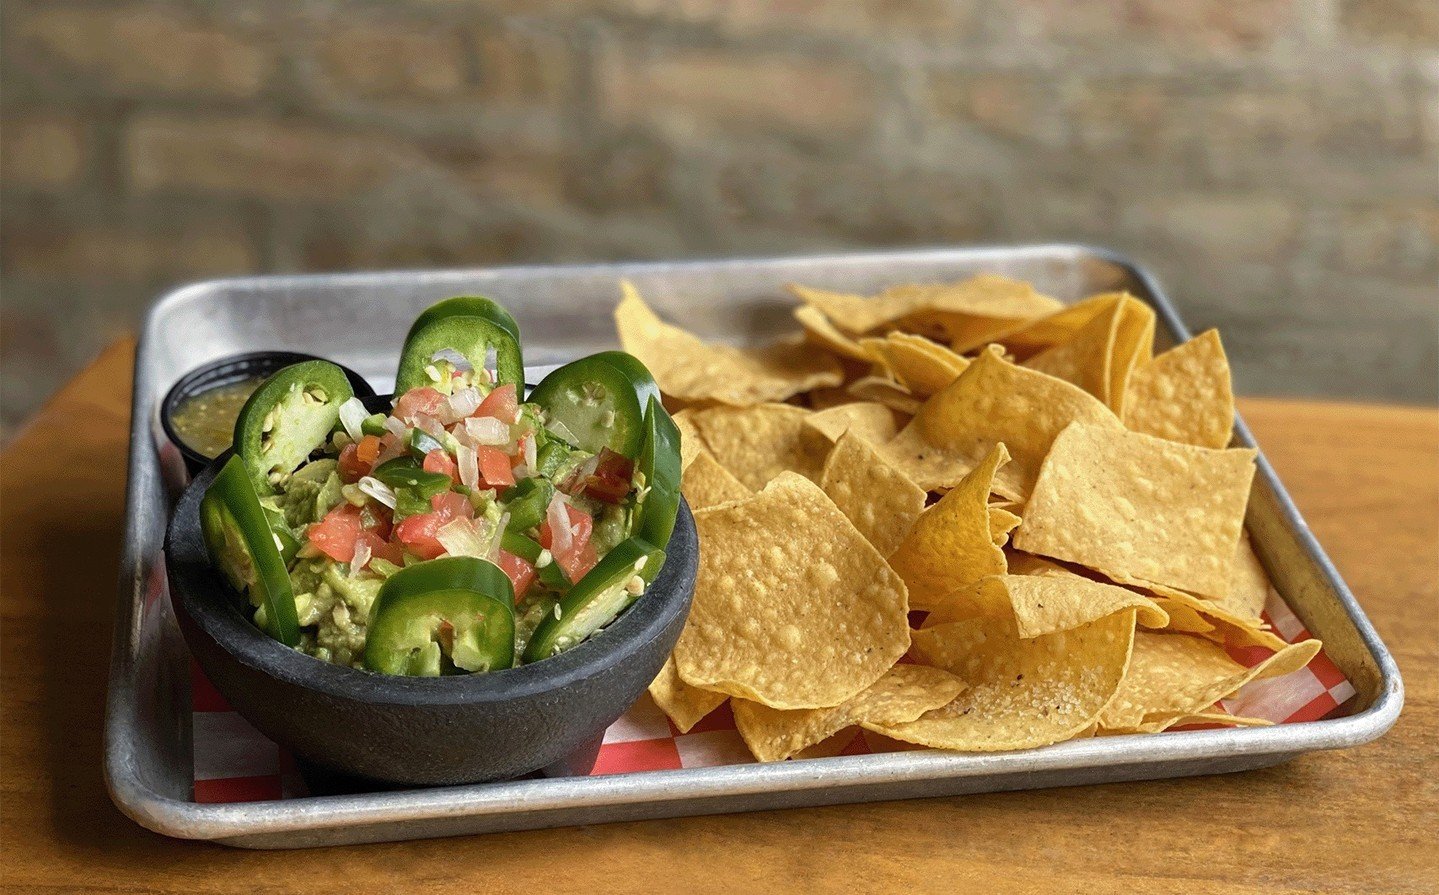 Looking for a shareable starter? Our Guac &amp; Chips features our luscious housemade guacamole with our house salsa verde and sour cream. Perfect nosh for the table, or a meal just for you! We'll be watching the Bulls take on the Heat for a spot in 